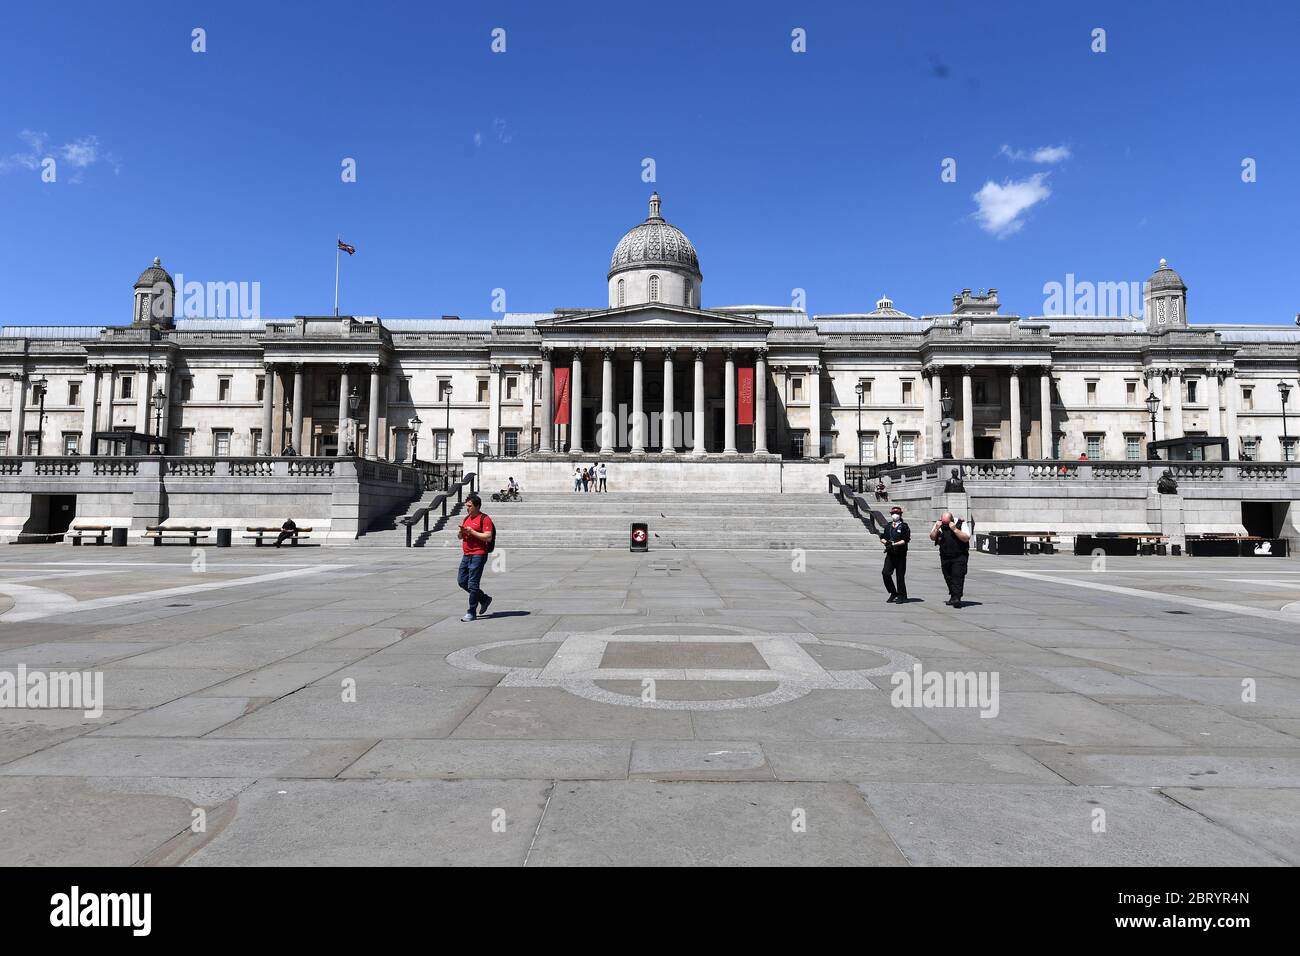 People walk across Trafalgar Square, London, after the introduction of measures to bring the country out of lockdown. Stock Photo